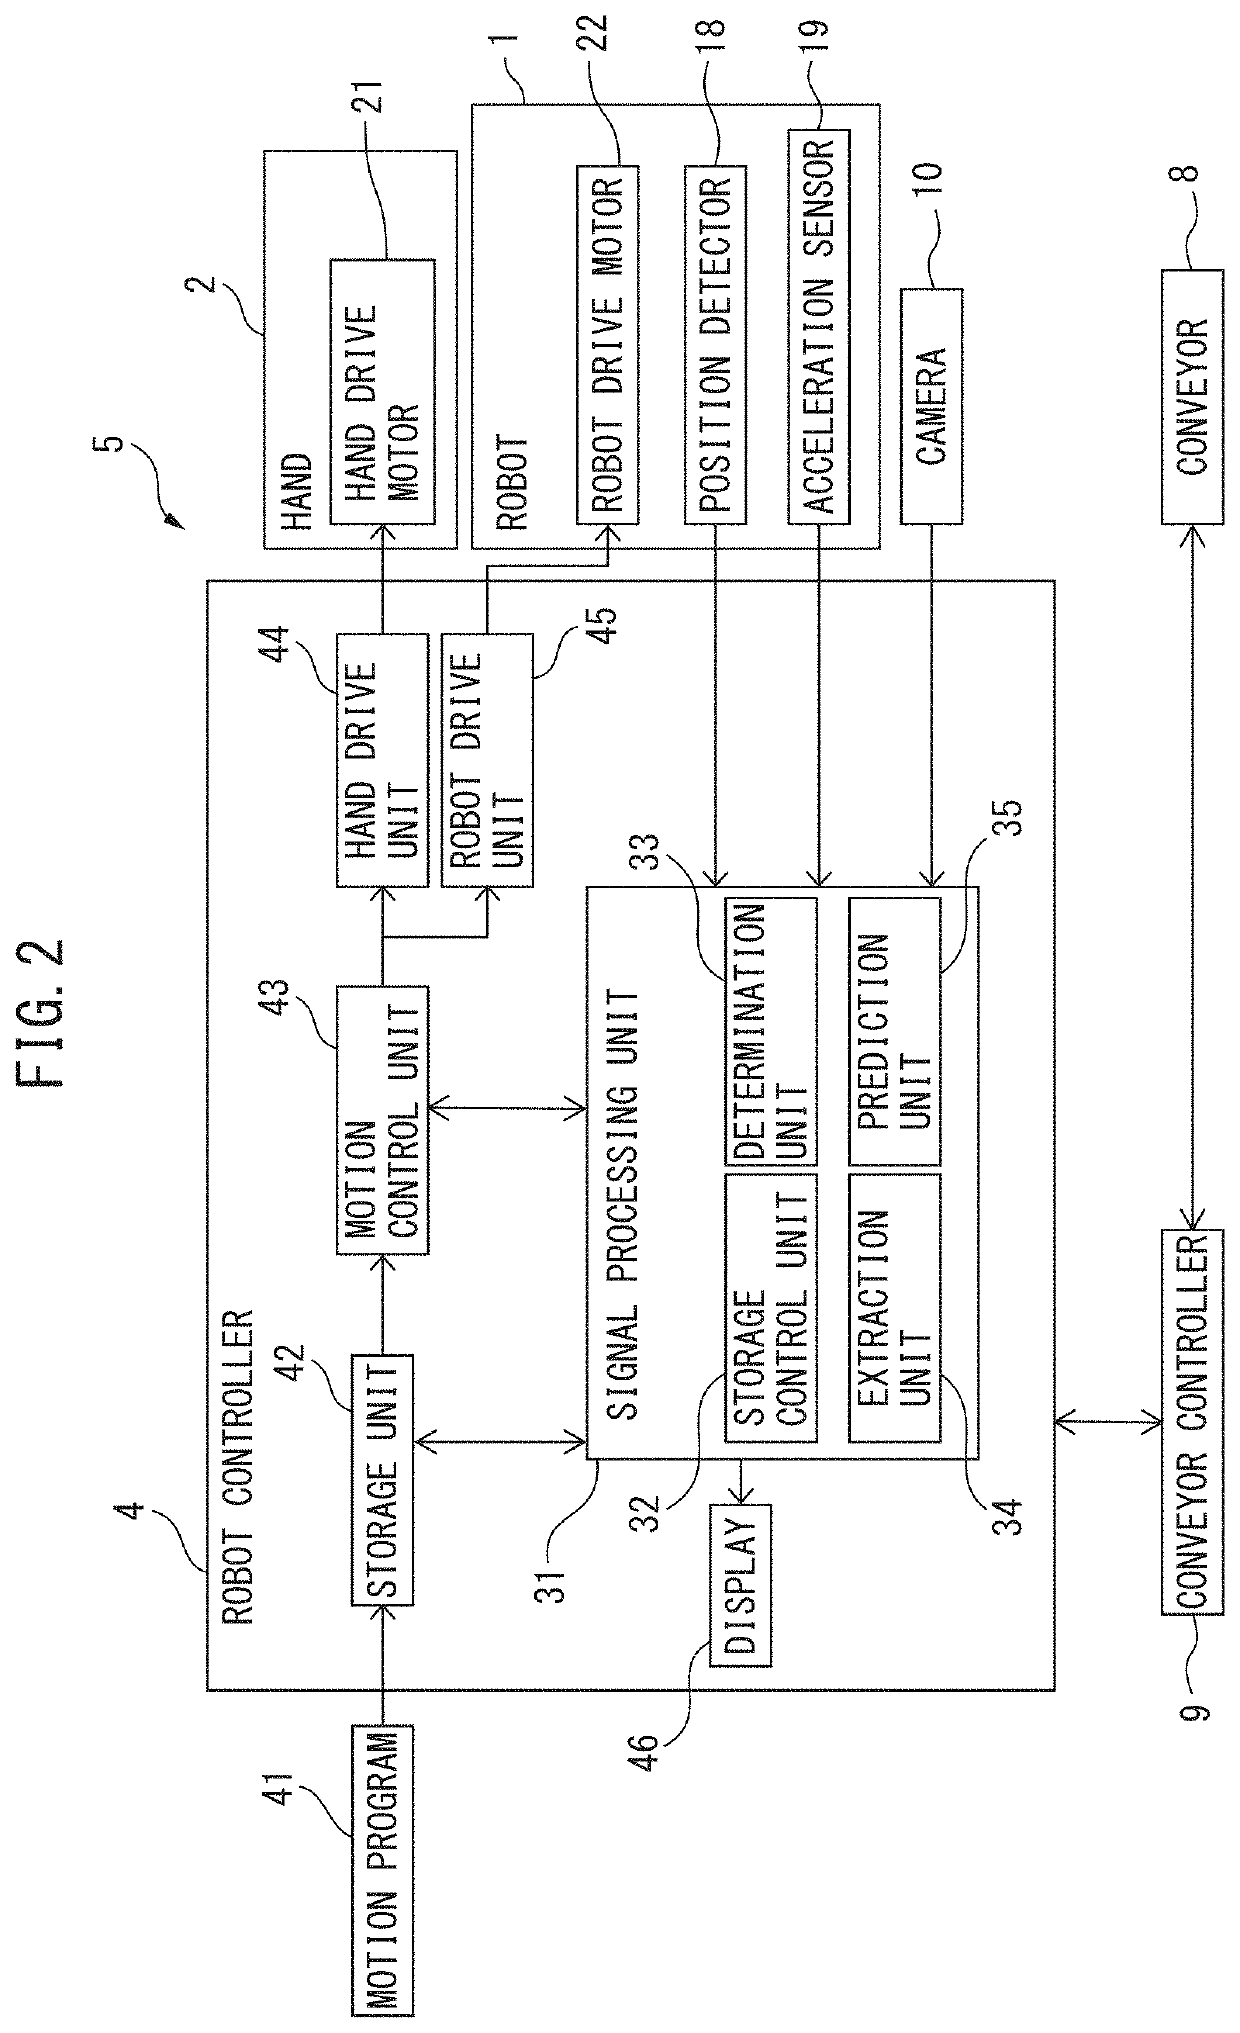 Monitor device provided with camera for capturing motion image of motion of robot device